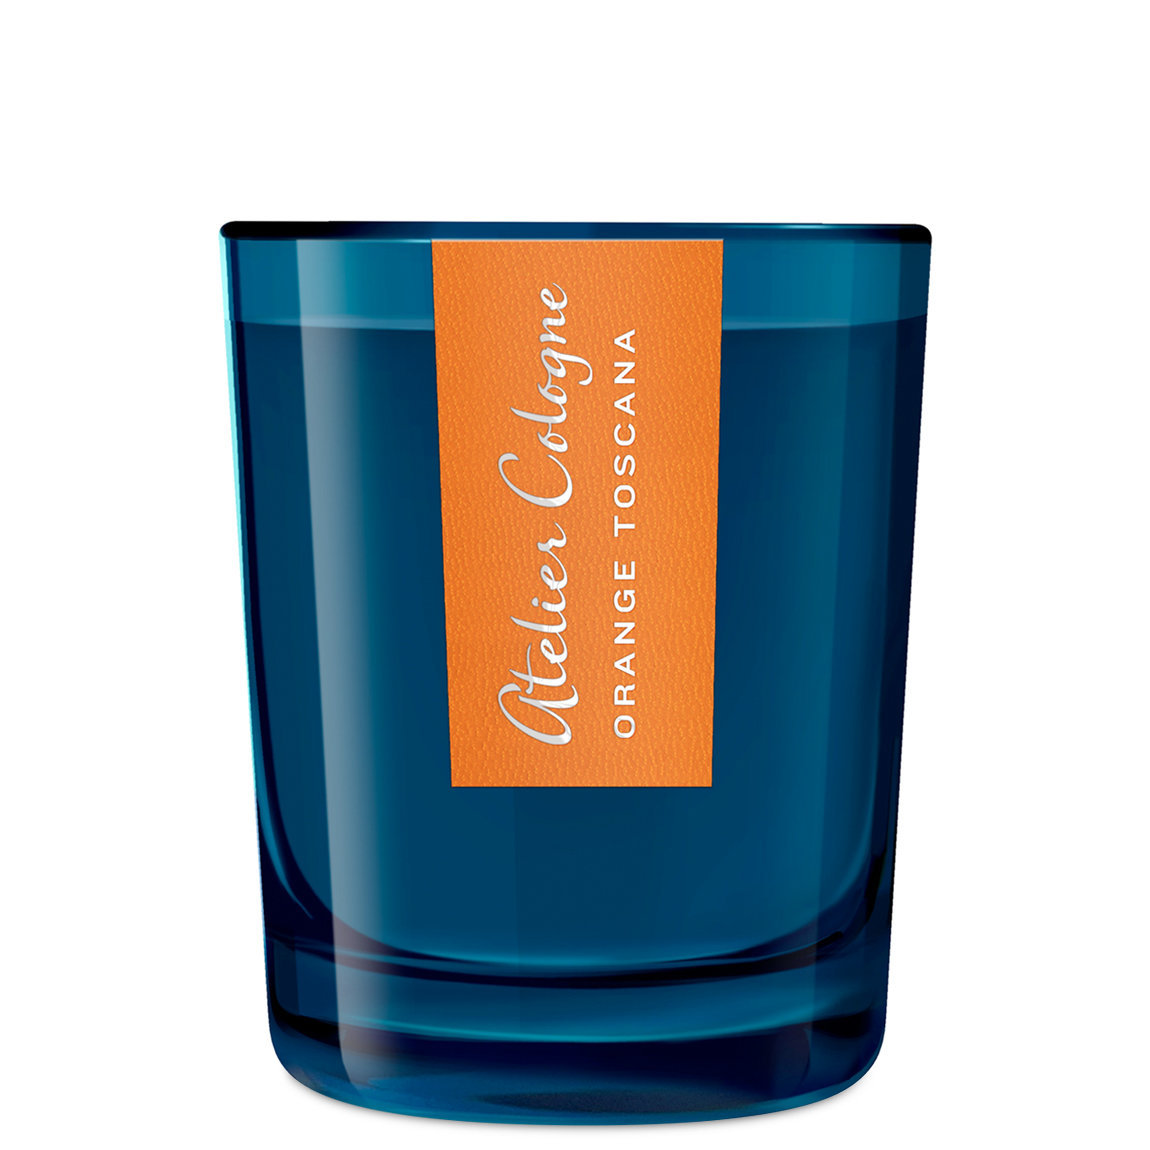 Atelier Cologne Orange Toscana Candle alternative view 1 - product swatch.